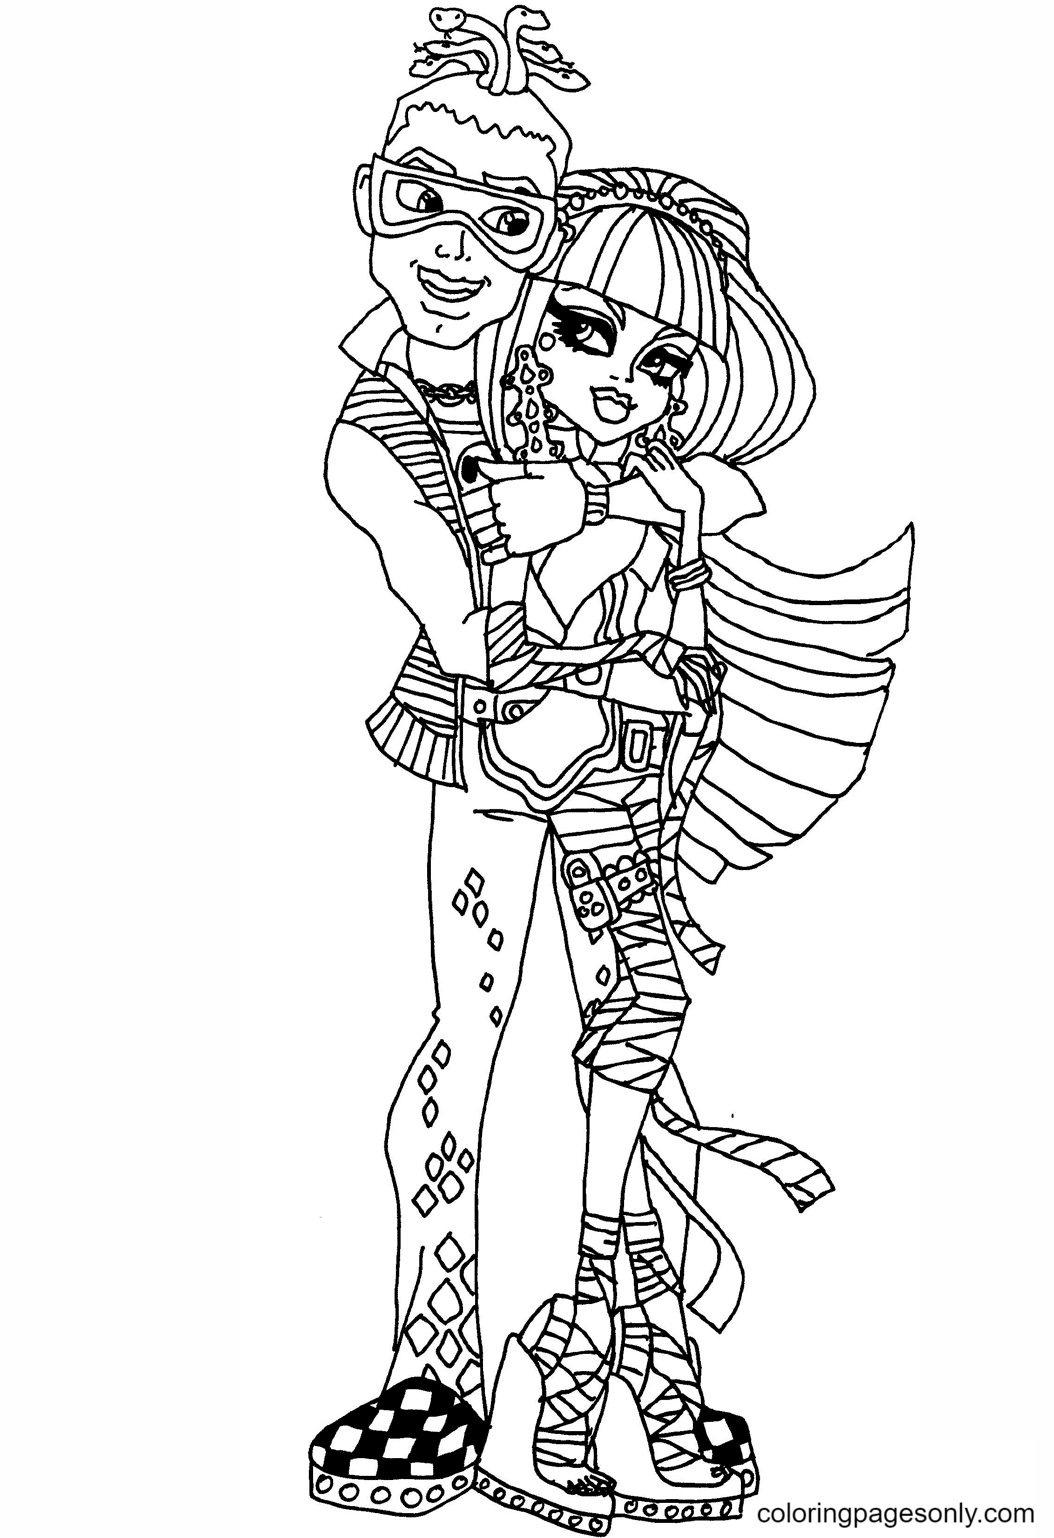 Deuce and Cleo Coloring Page